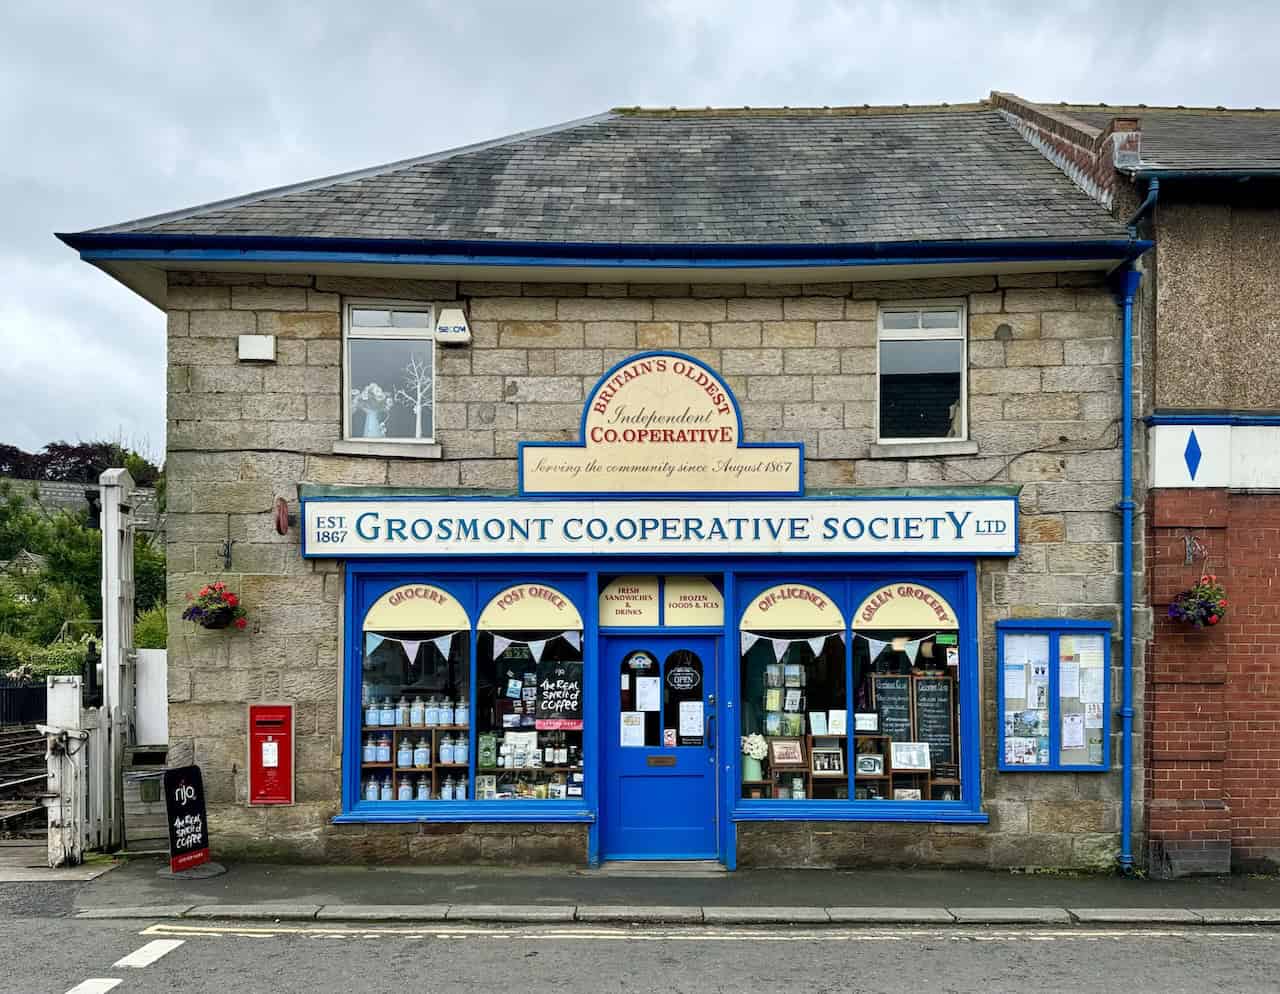 The historic Grosmont Co-operative Society Ltd, Britain’s oldest independent co-op, established in 1867.